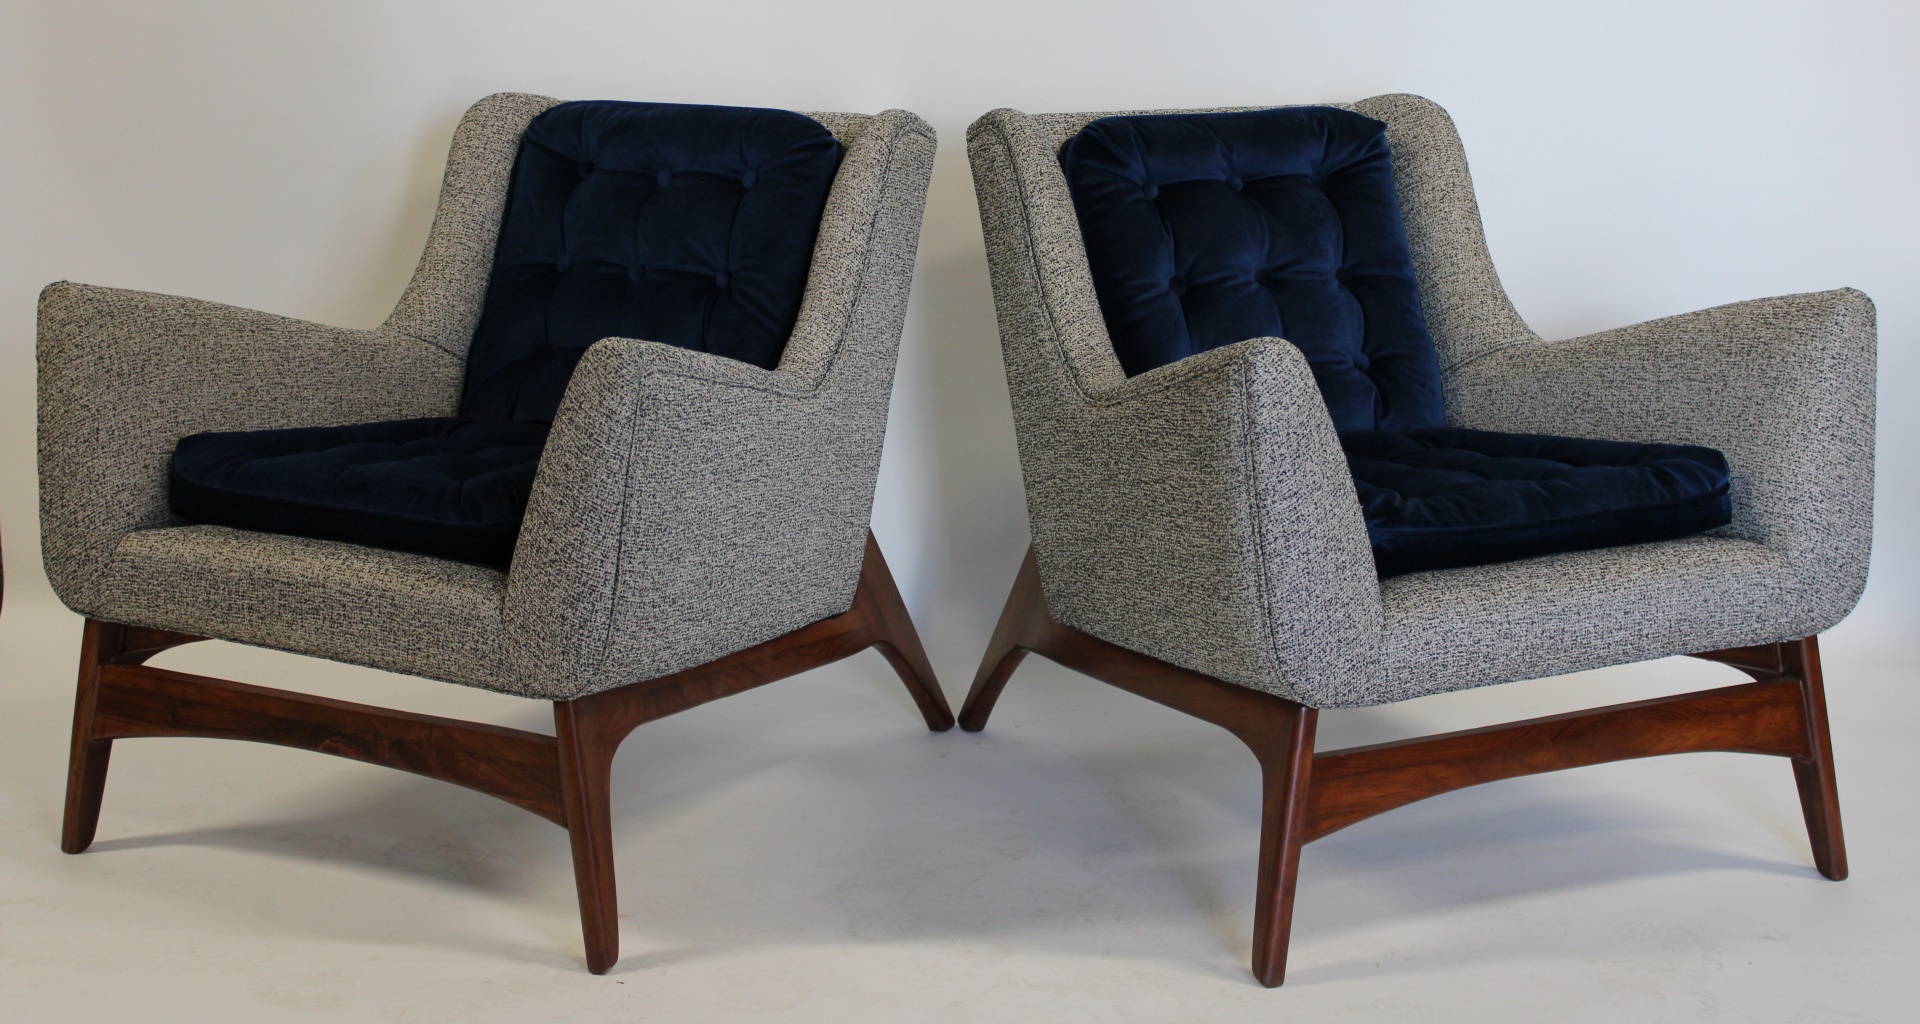 A MIDCENTURY STYLE PAIR OF UPHOLSTERED 3ba5ff